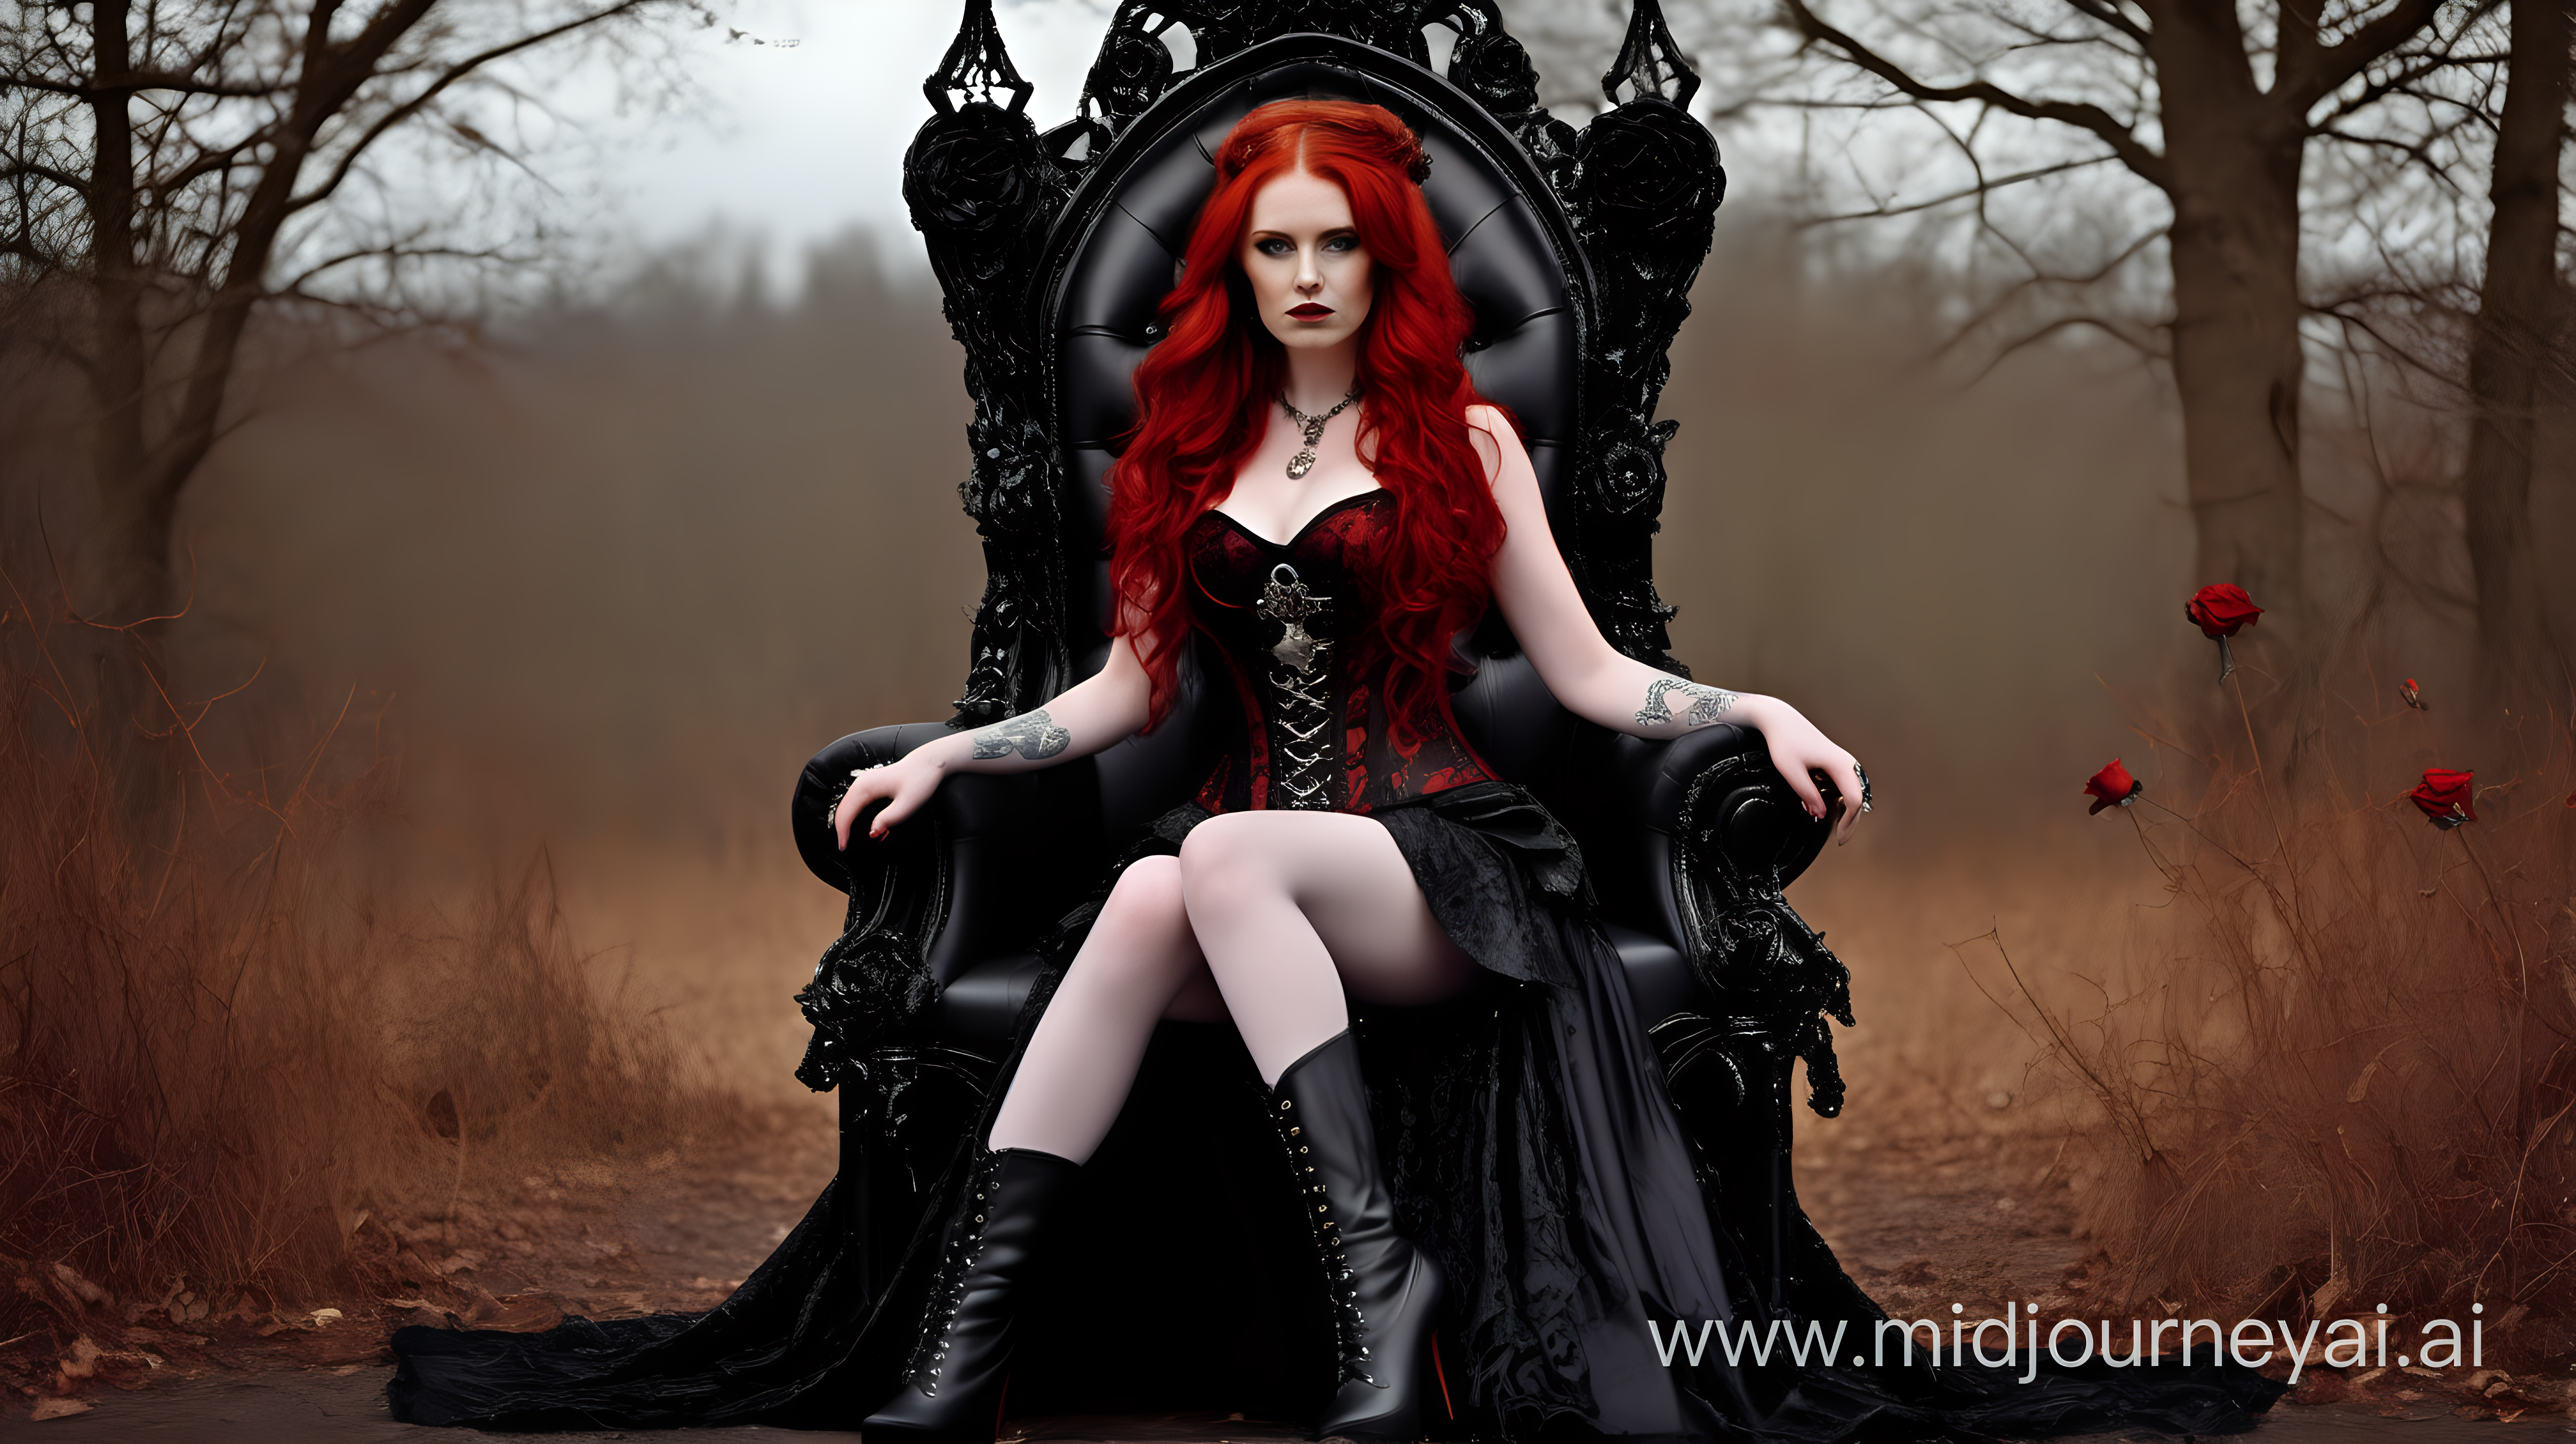 Slr quality 30 year old gothic queen. Red hair long curls. crystals. Fire. Highlands. Throne.  Skulls. Roses. Highlands. Corset Dress high heel boots. 